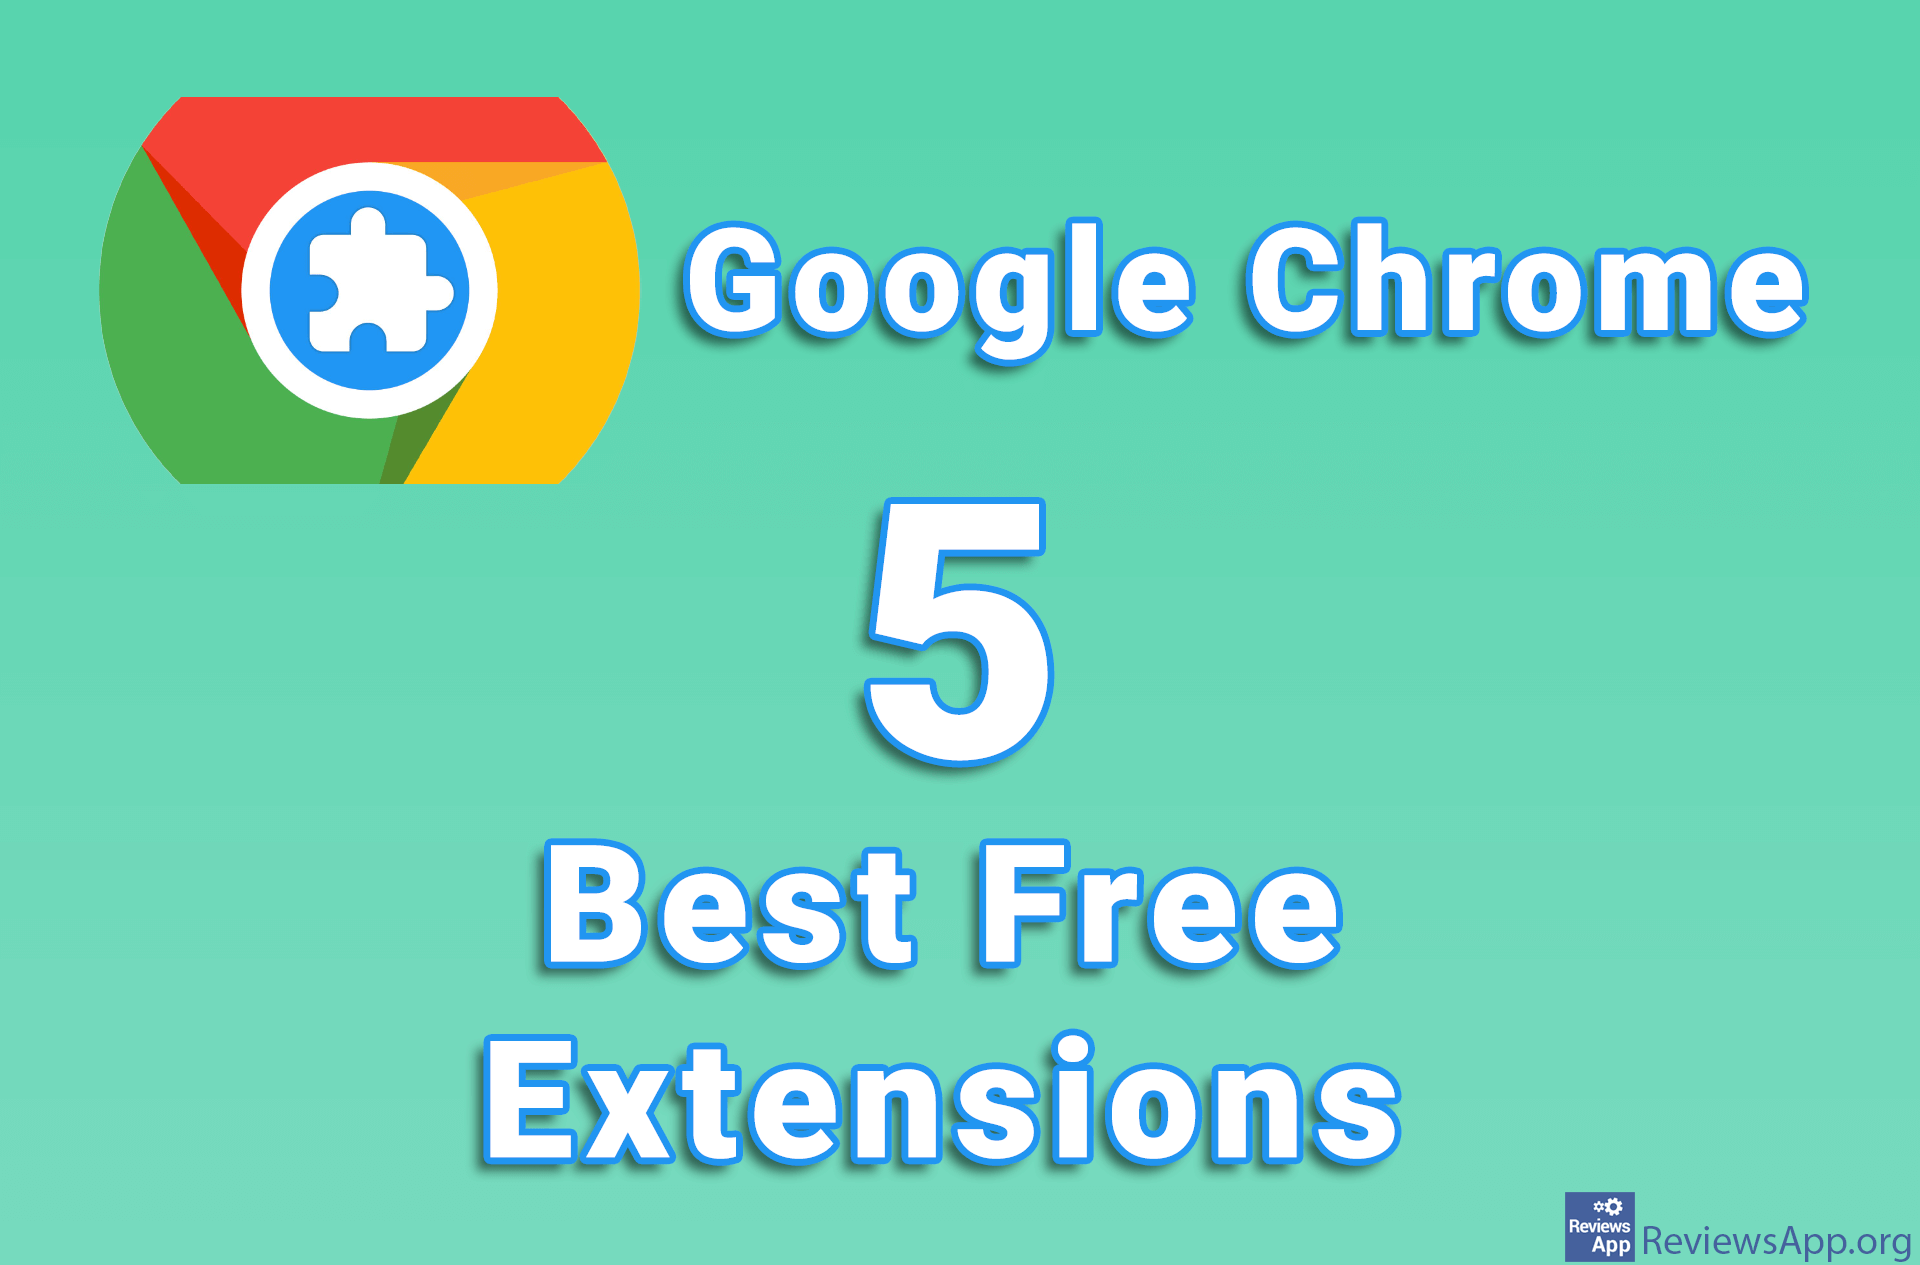 Top 5 Best Free Extensions for Google Chrome